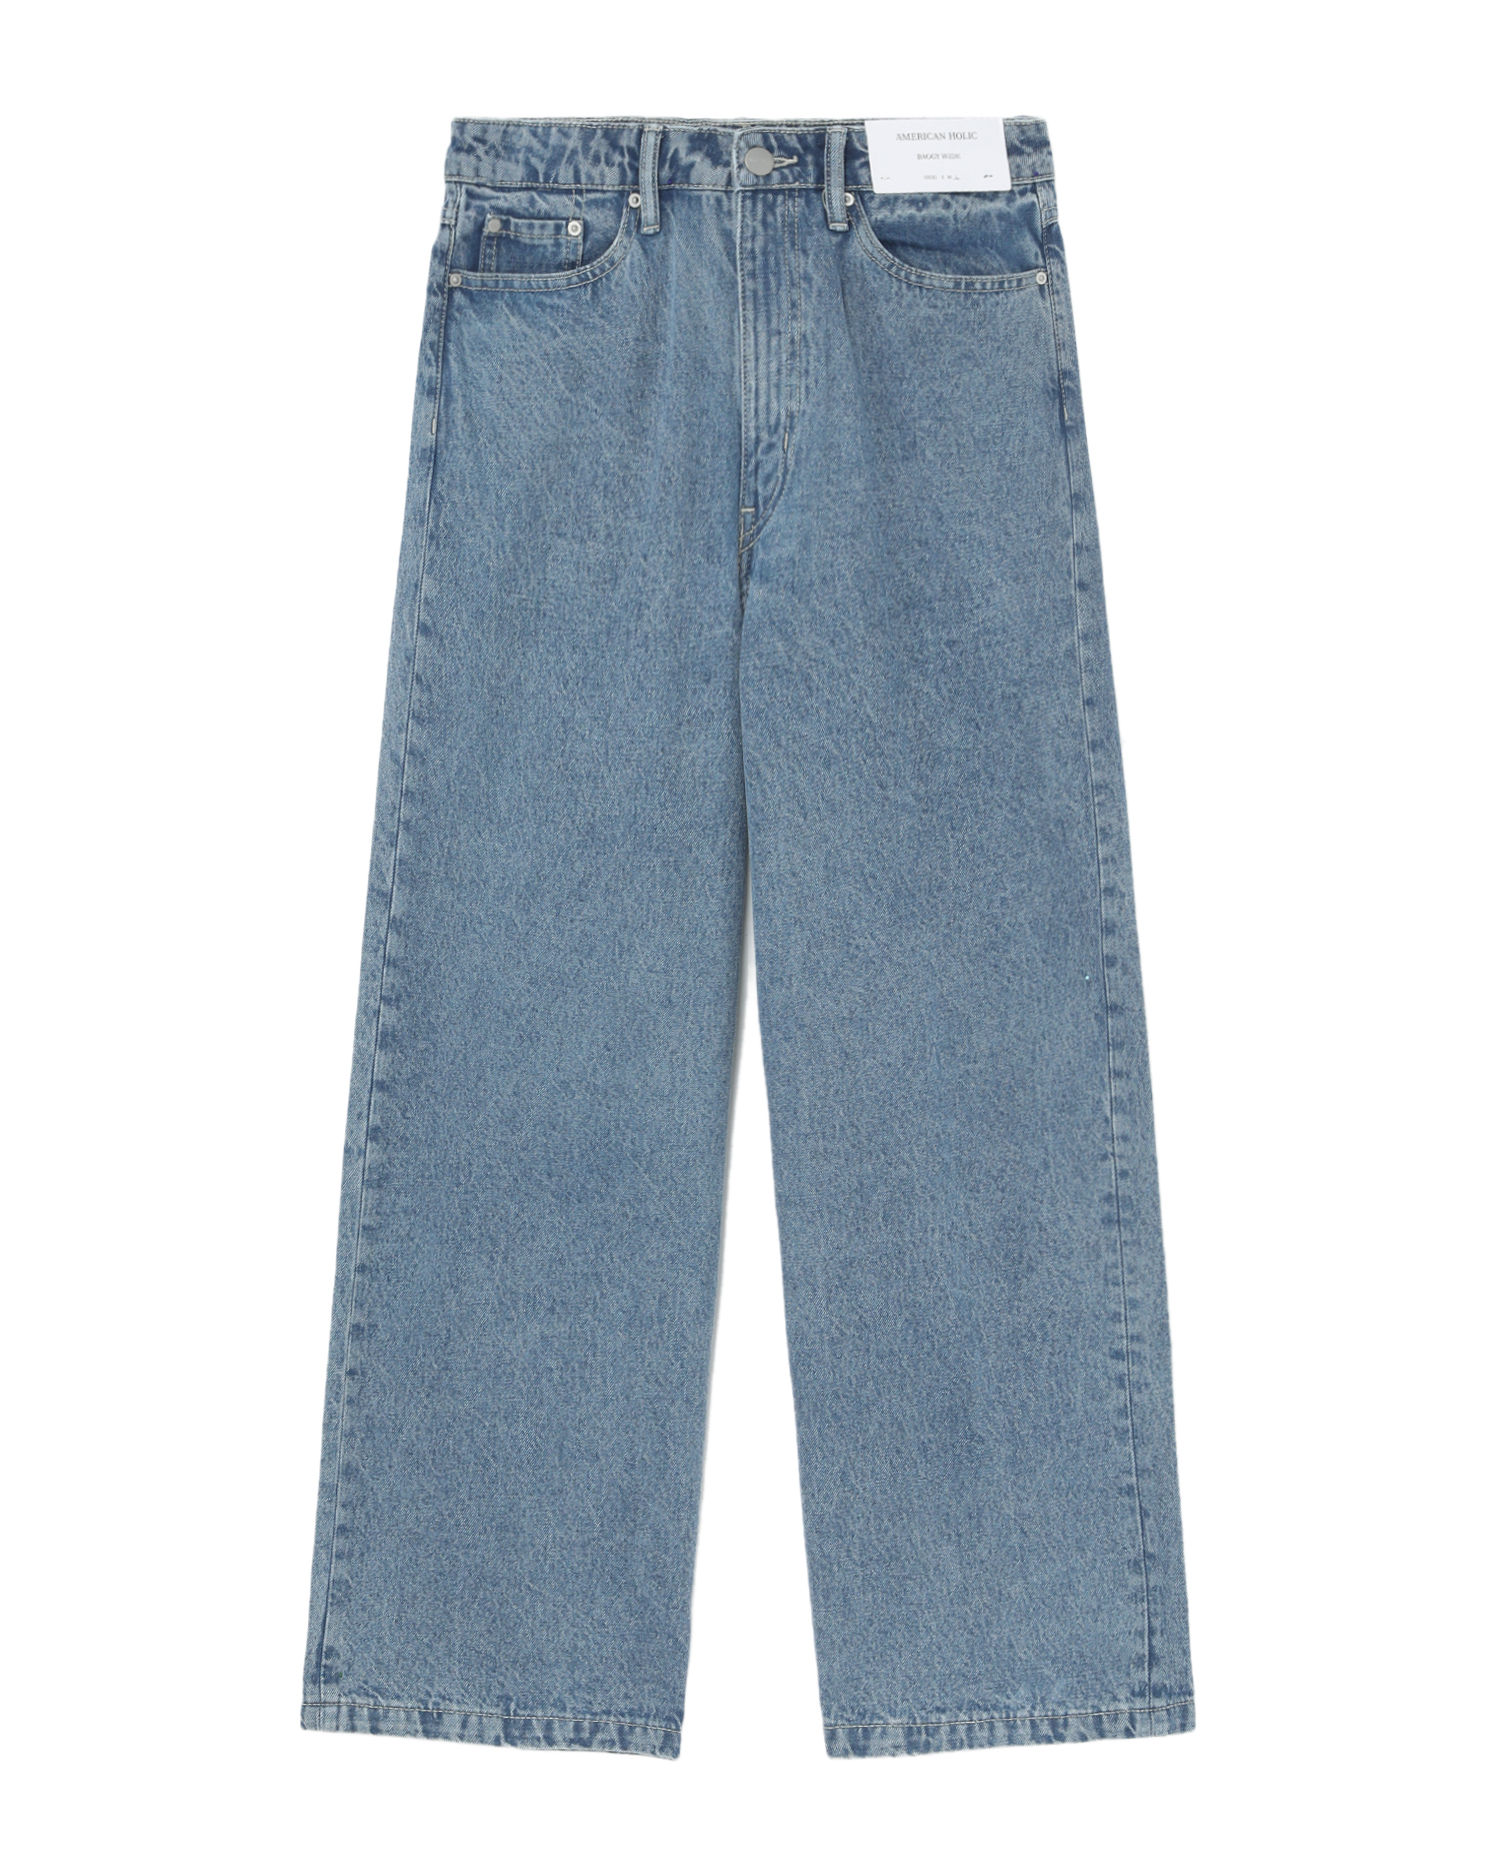 AMERICAN HOLIC Relaxed straight jeans | ITeSHOP